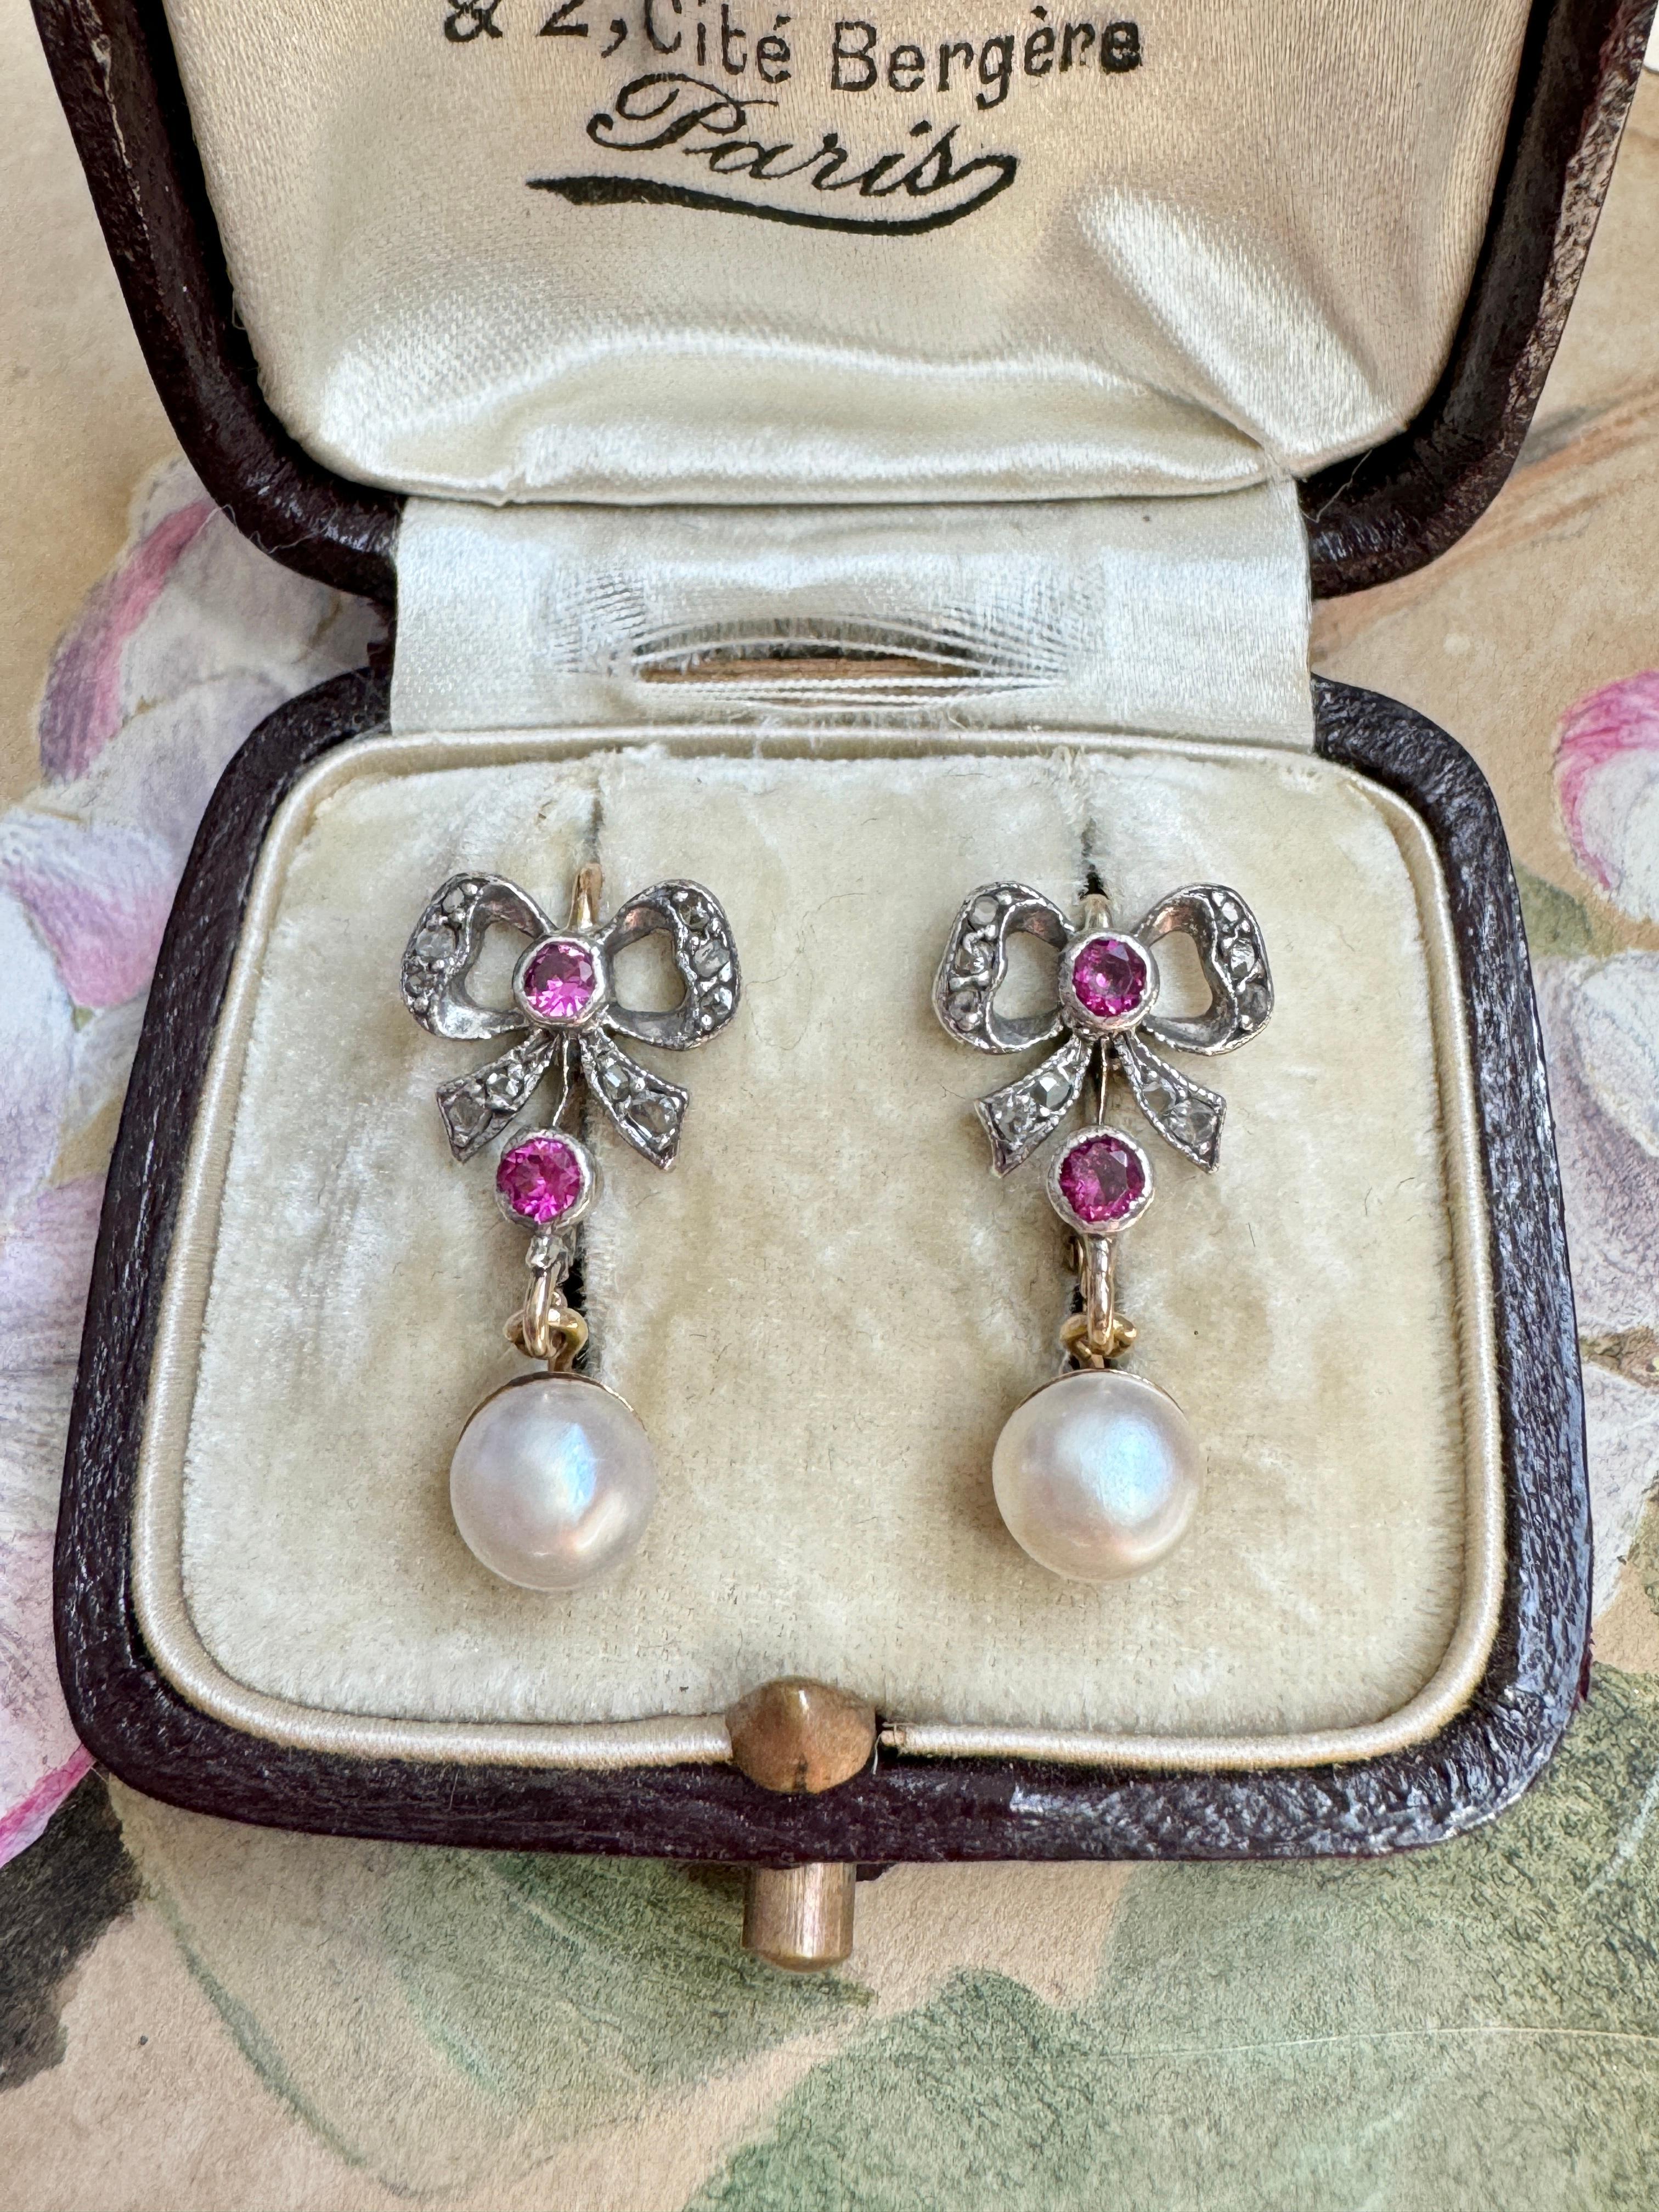 Flowing rose-cut diamond lined ribbons accented with vibrant synthetic rubies suspend lustrous pearl drops in these sweet Edwardian earrings. Crafted in silver topped gold.

Measurements: 7/8